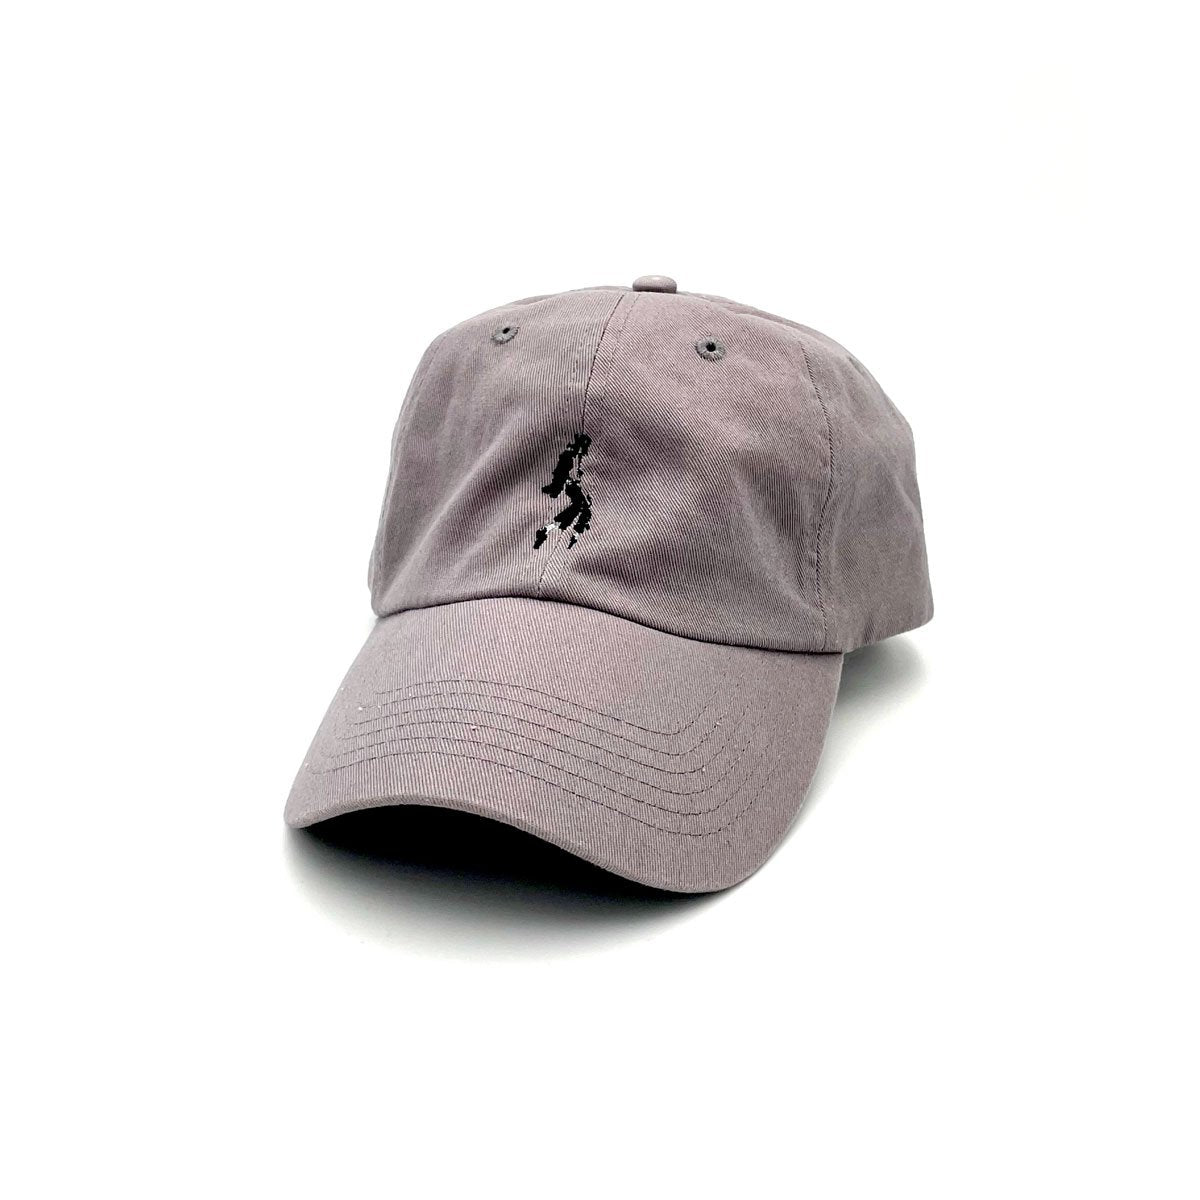 MJ THE MUSICAL Icon Cap - Grey Image